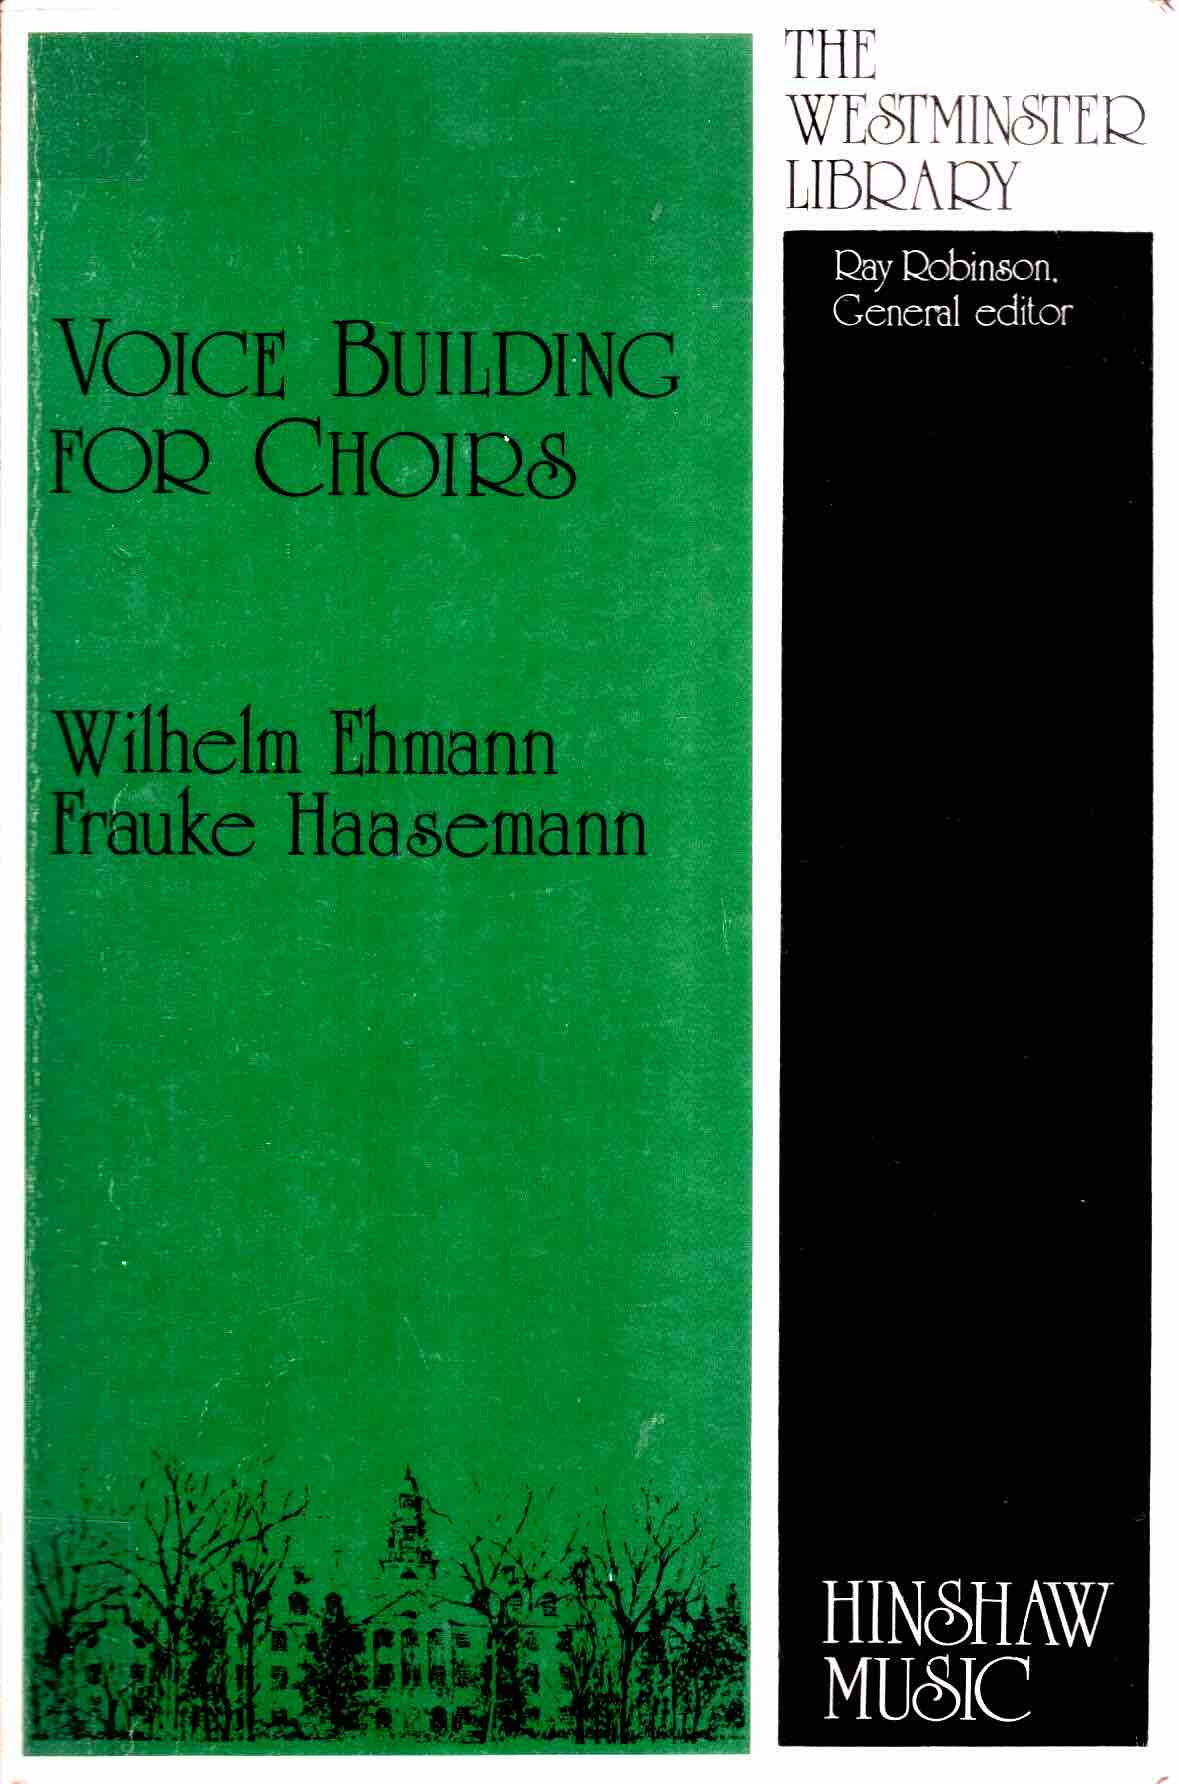 Cover of Voice Building for Choirs